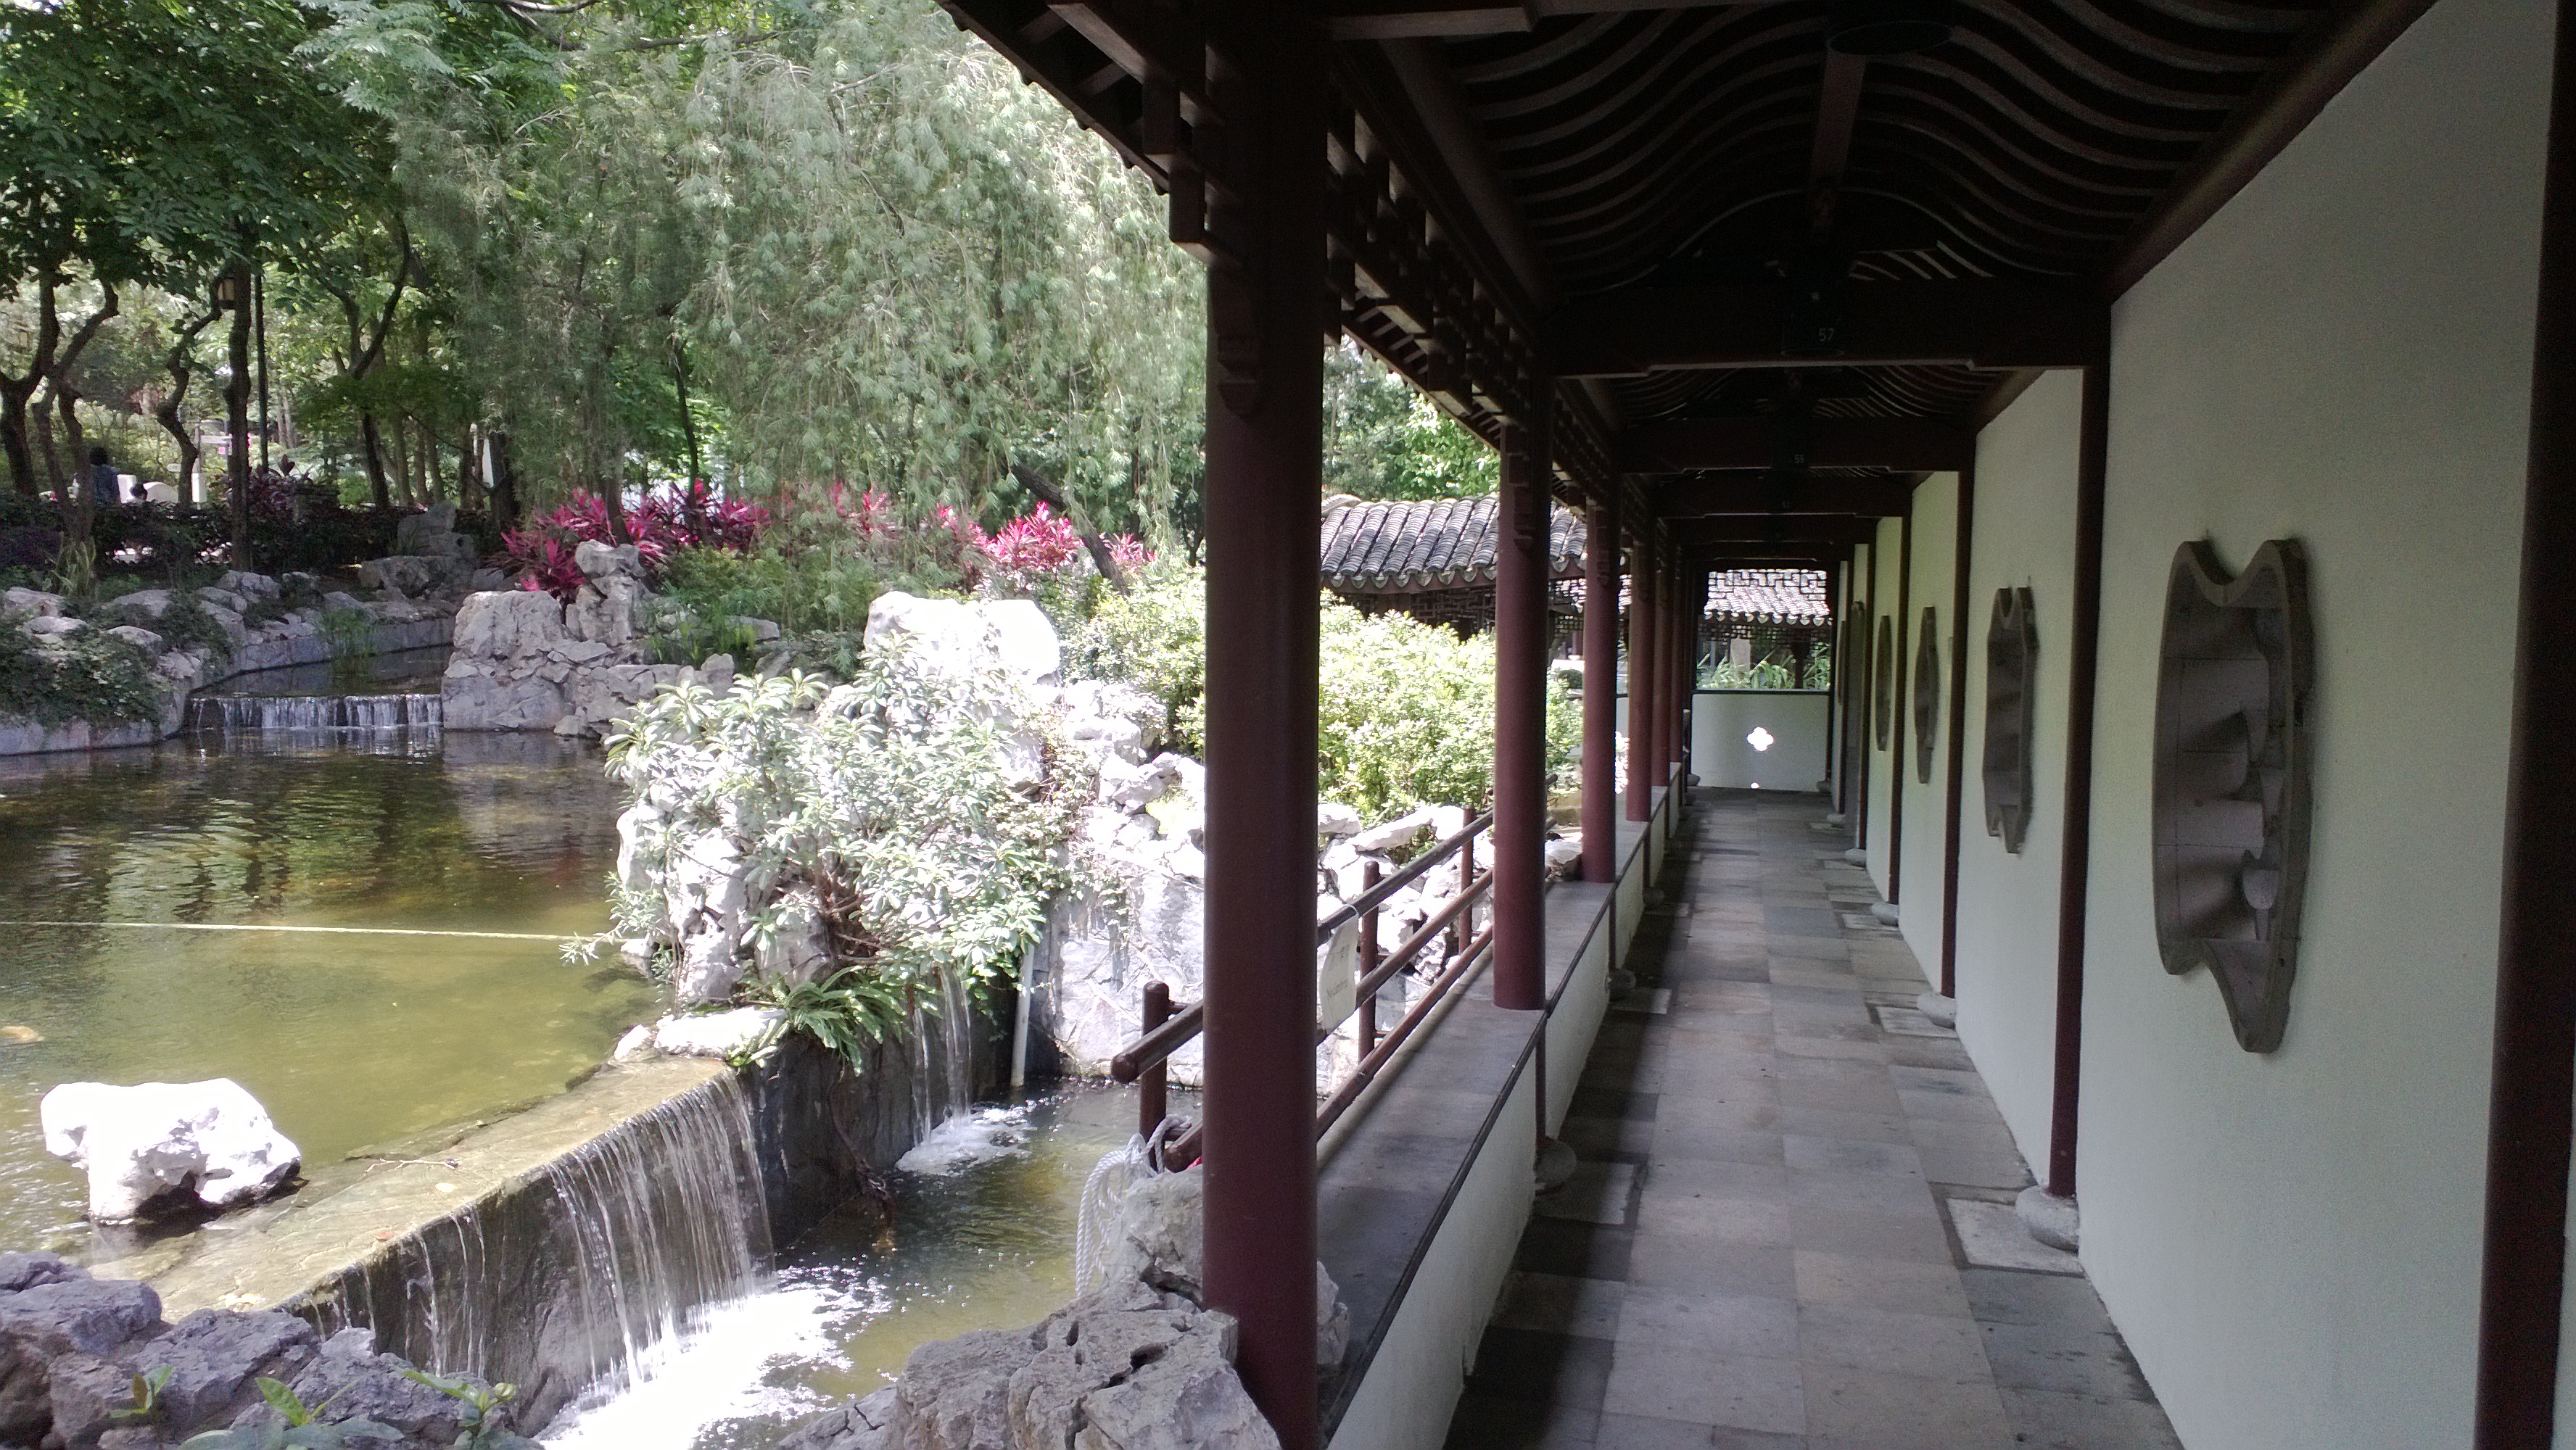 Chinese landscaping at Kowloon Walled City Park